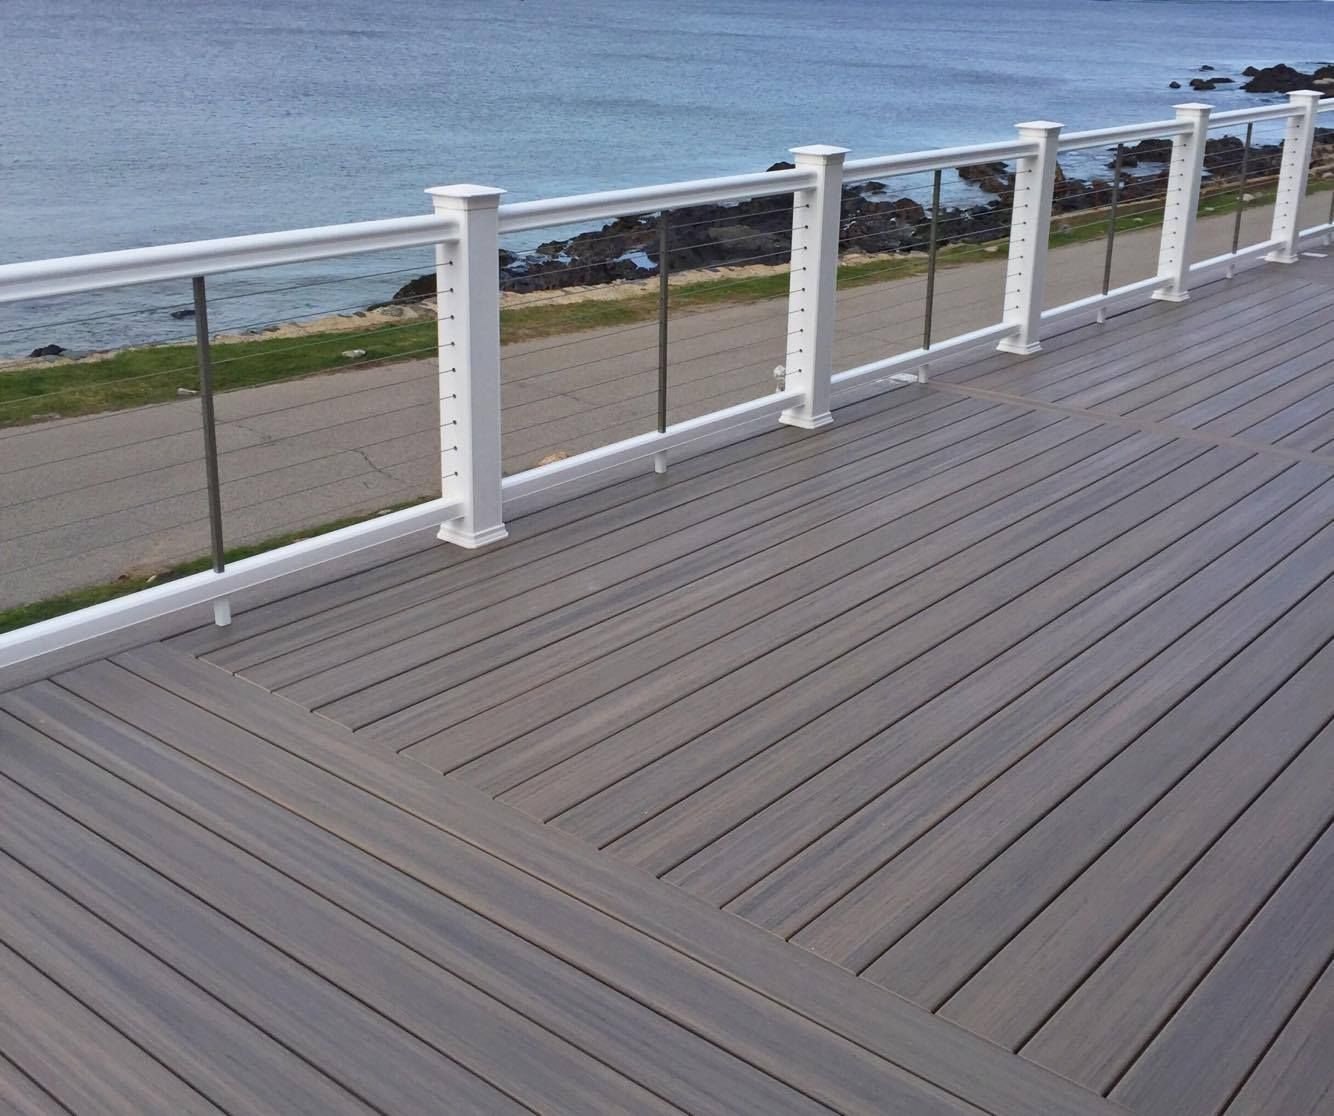 10 Spectacular Paramount Hardwood Flooring Reviews 2024 free download paramount hardwood flooring reviews of beautiful view even more beautiful deck this fiberon paramount pvc with this fiberon paramount pvc decking is extremely resilient and contains no organ